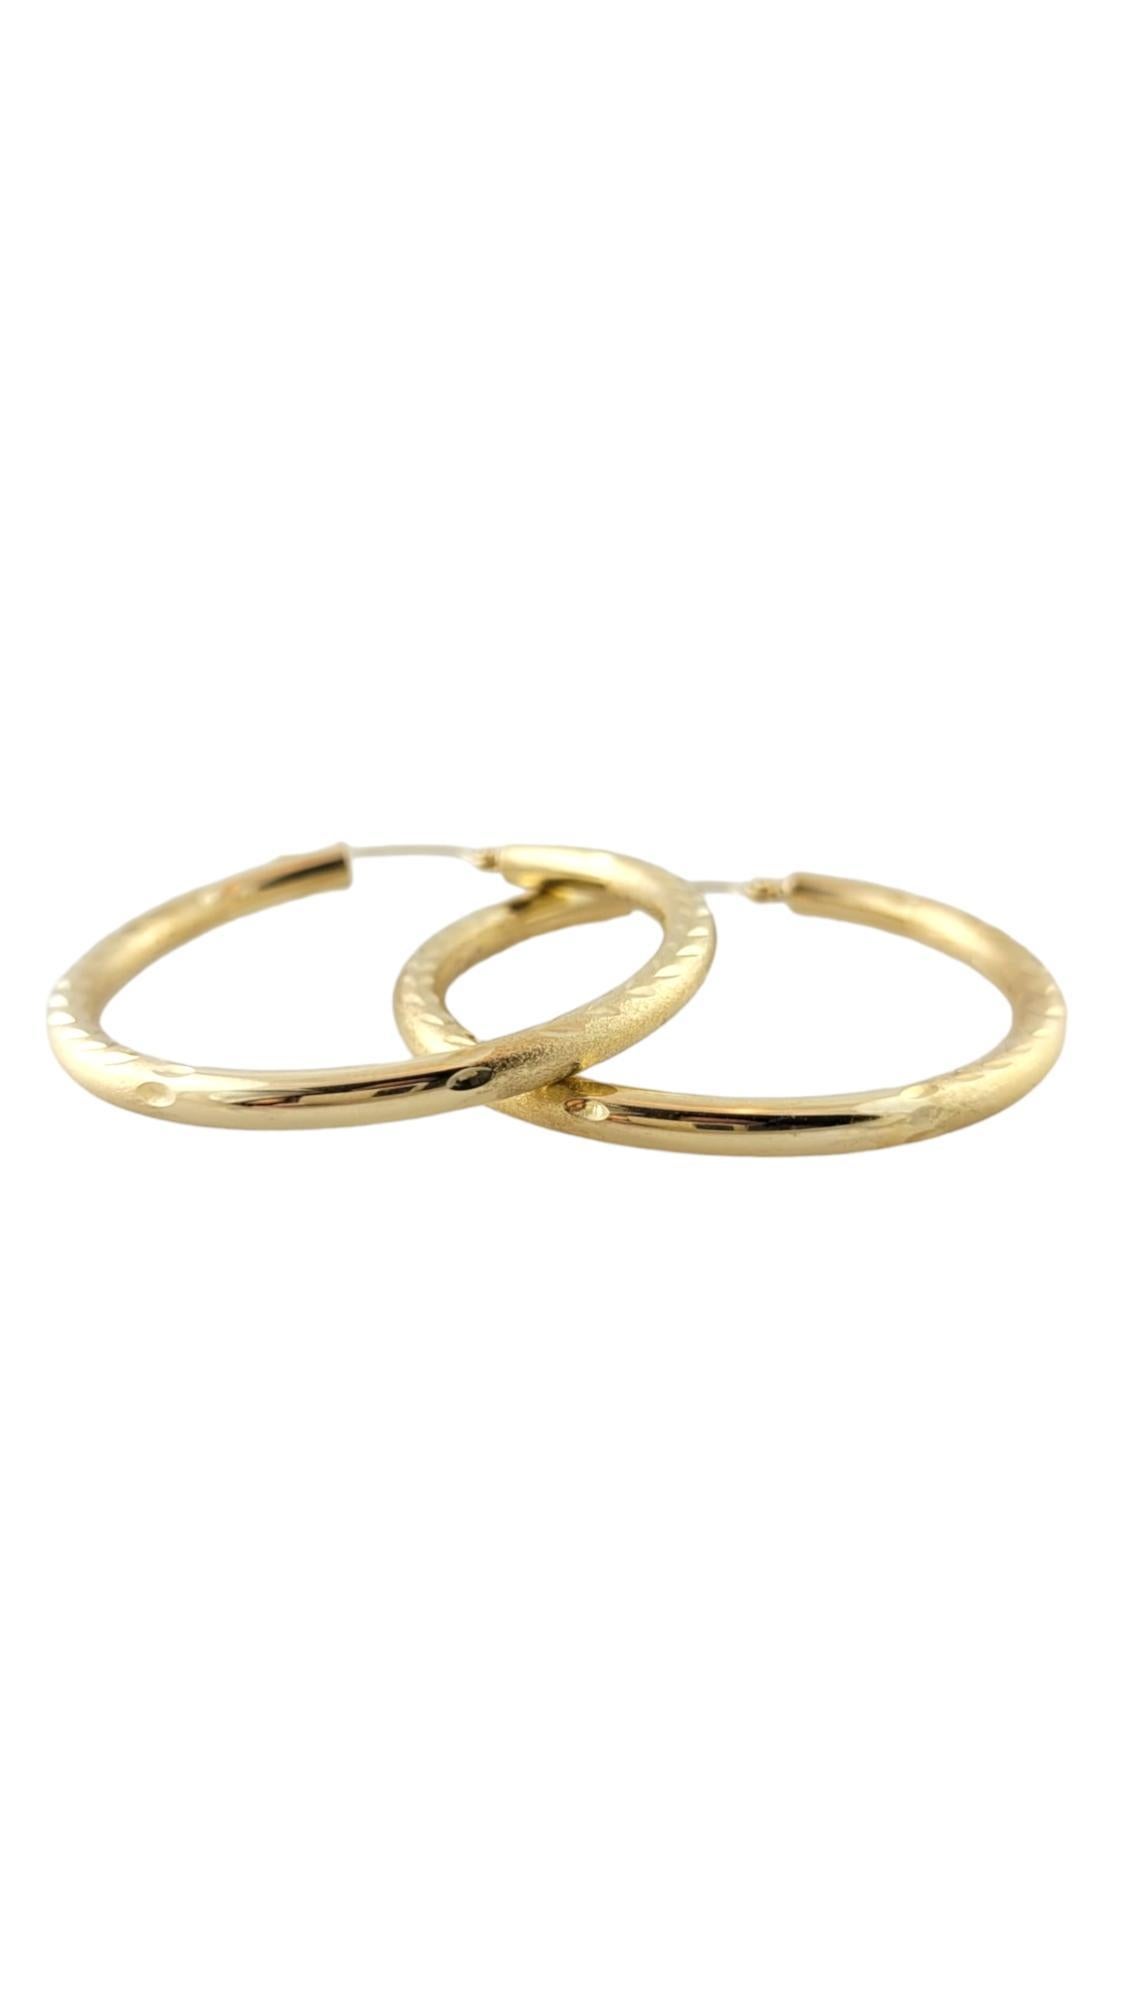 14K Yellow Gold Textured Hoop Earrings #16864

These gorgeous 14K yellow gold hoop earrings have a beautiful textured pattern for a lovely, finished look!

Diameter:38.21mm
Width: 3.05mm

Weight: 1.94 dwt/ 3.02 g

Hallmark: 14K

Very good condition,